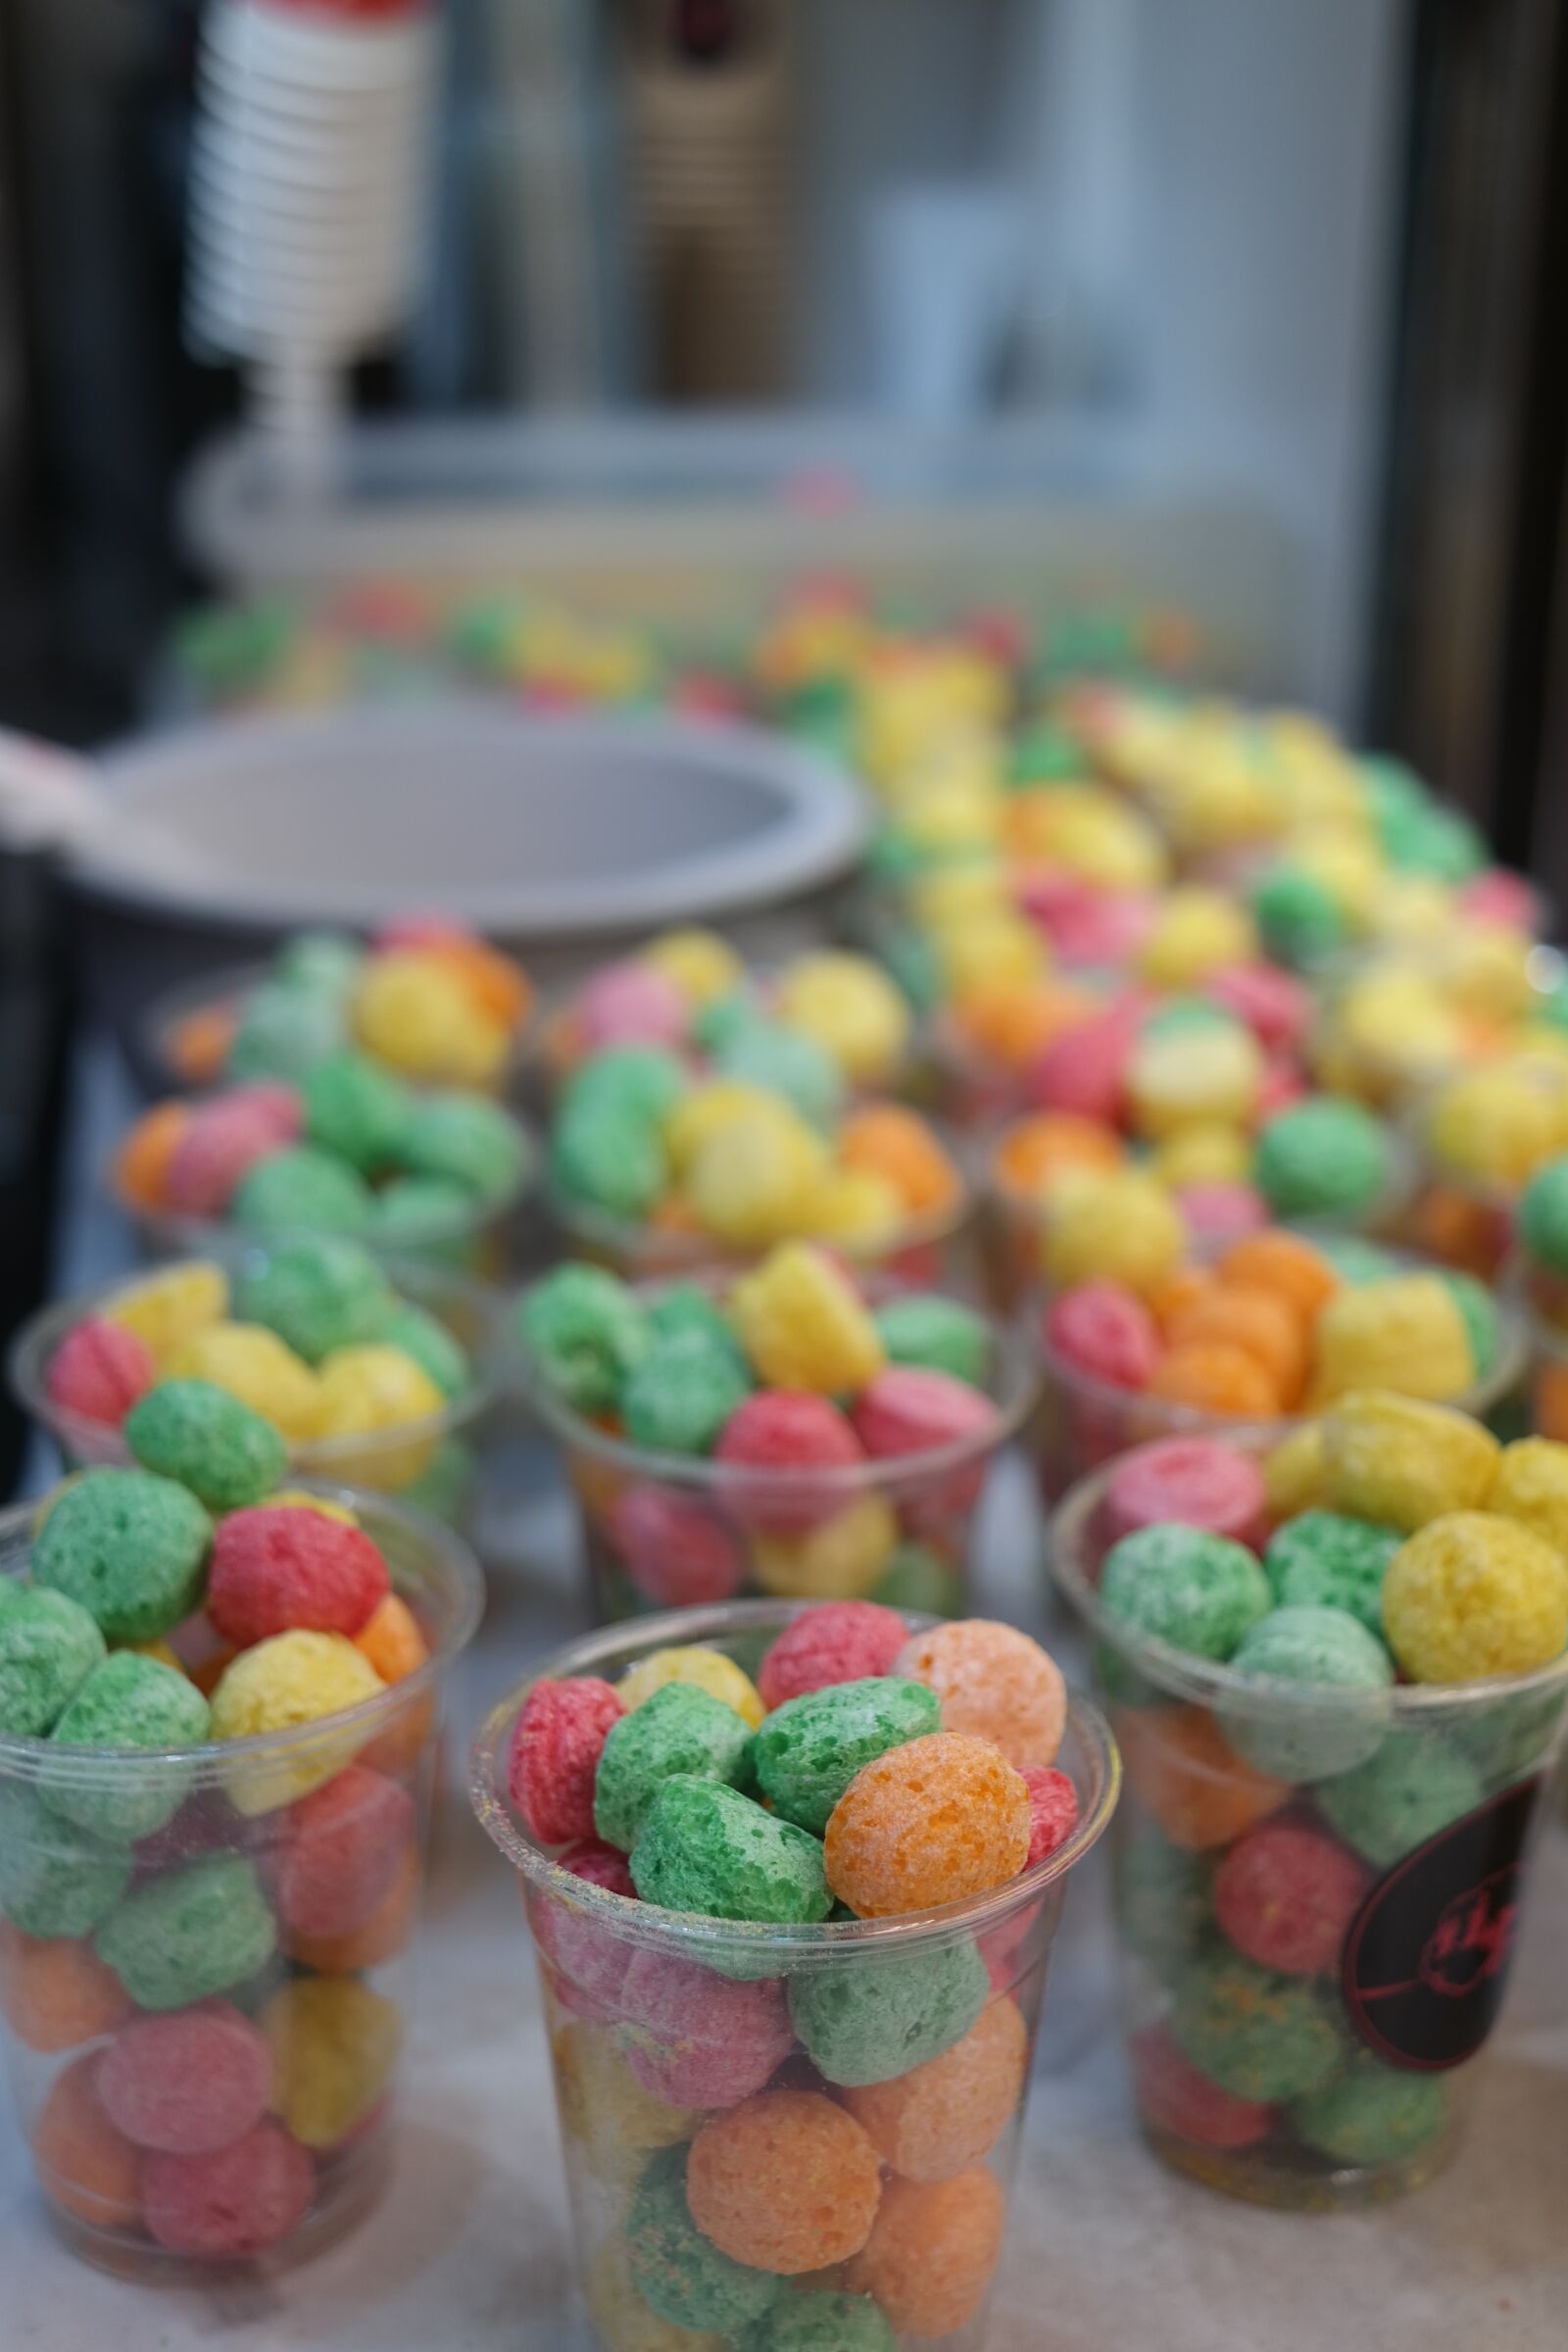 Samsung NX300M sample photo. Confectionery, food, al green photography